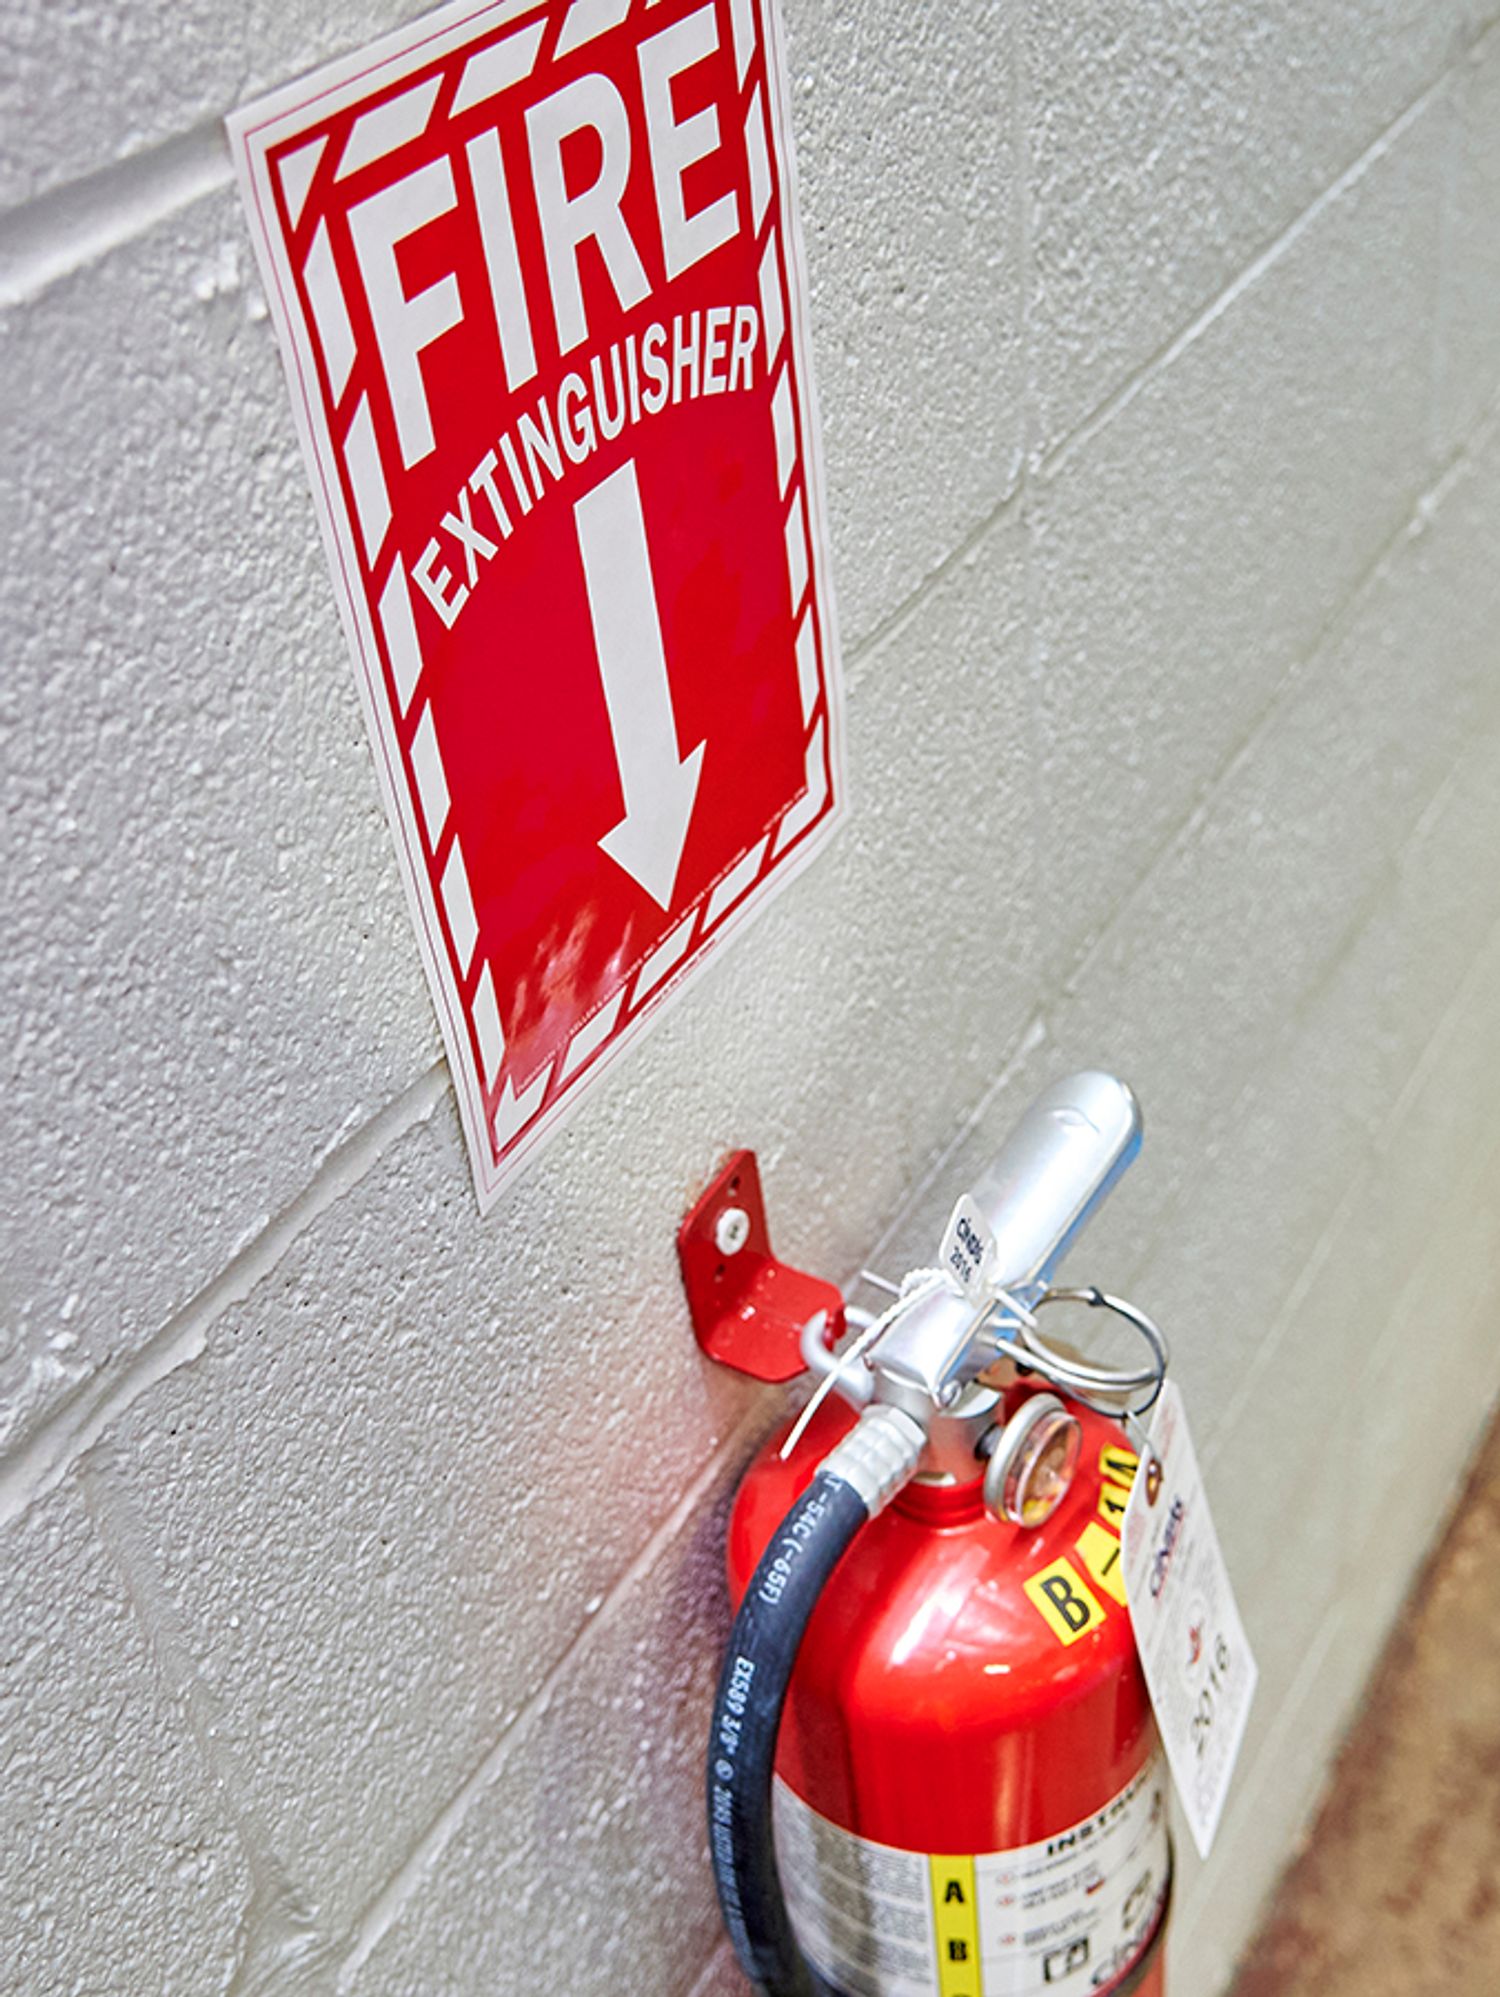 Premium Photo  Fire extinguisher cabinet mounted on the wall in